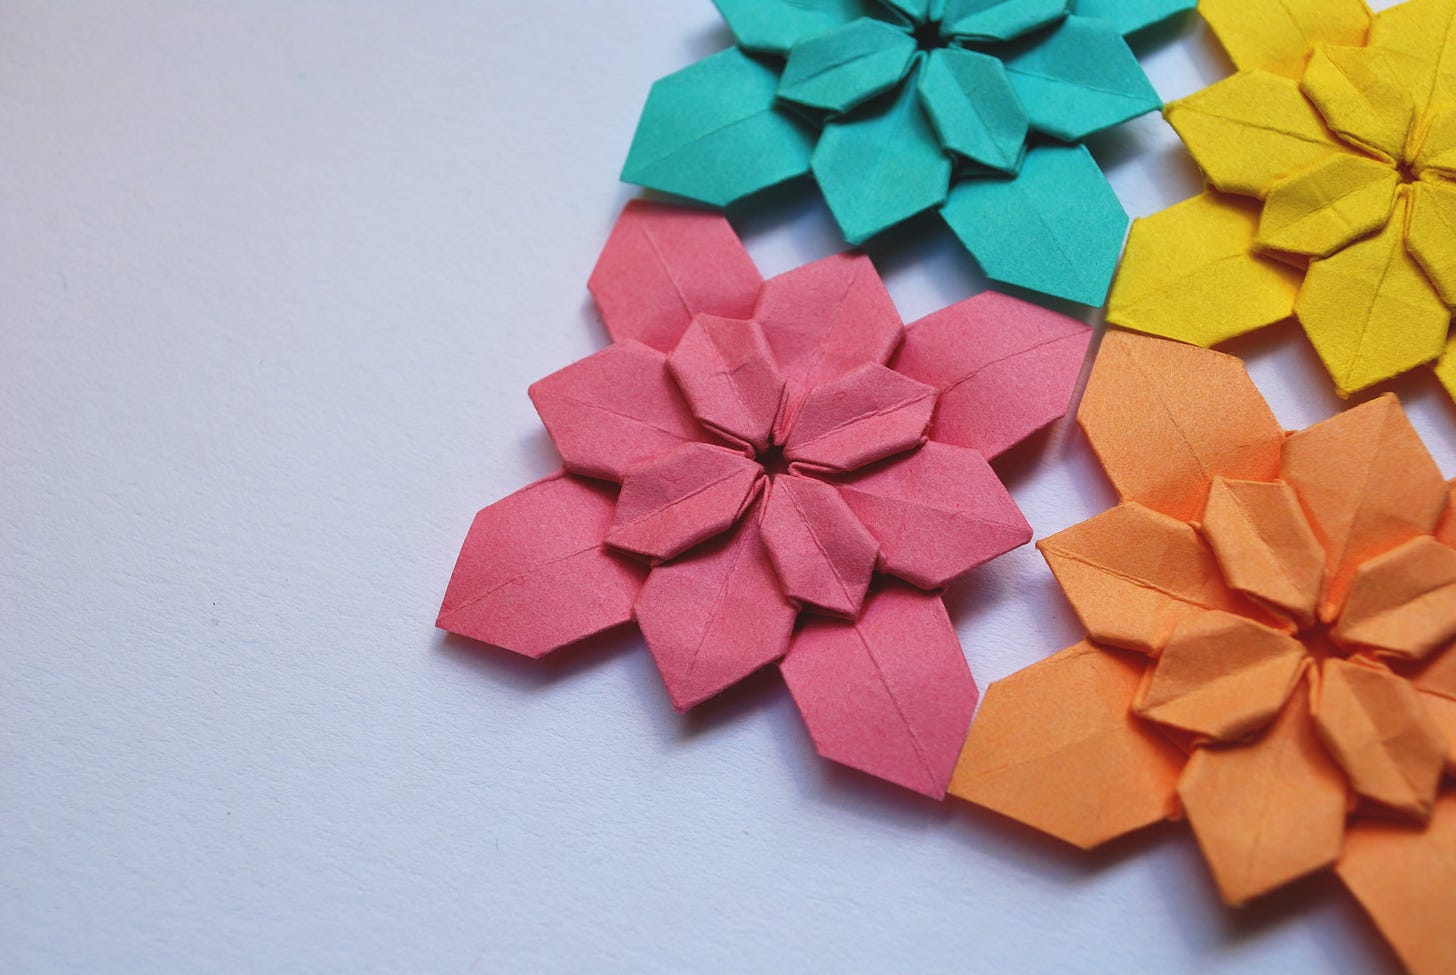 An off-center shot of four origami flowers or stars in different colors: pink, orange, yellow, and teal. 